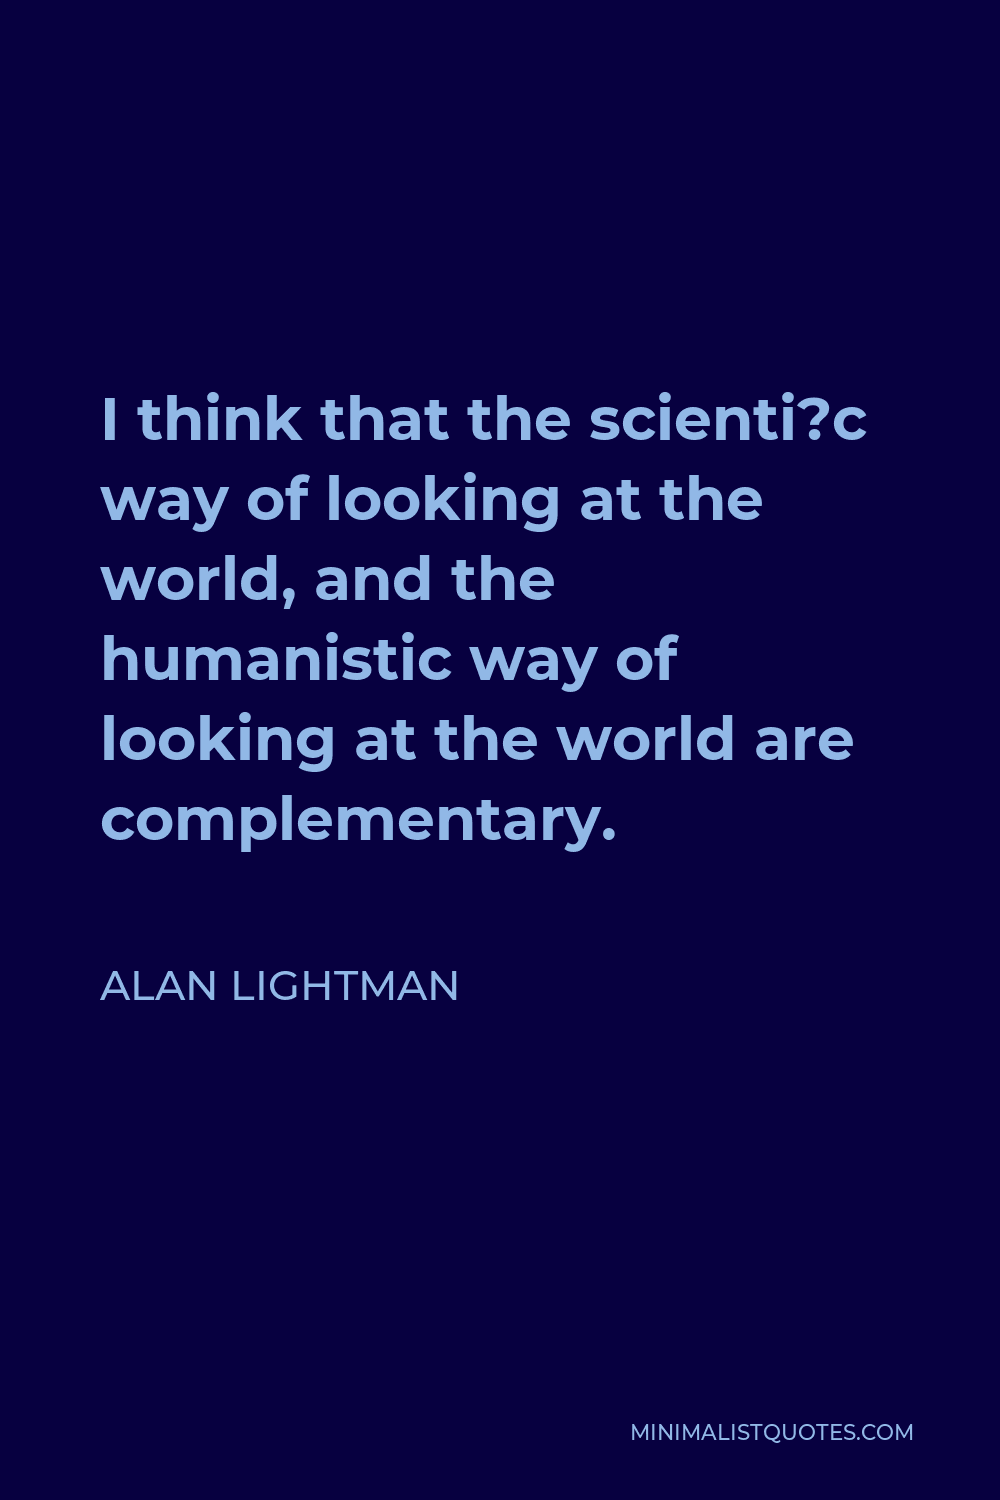 Alan Lightman Quote - I think that the scienti?c way of looking at the world, and the humanistic way of looking at the world are complementary.